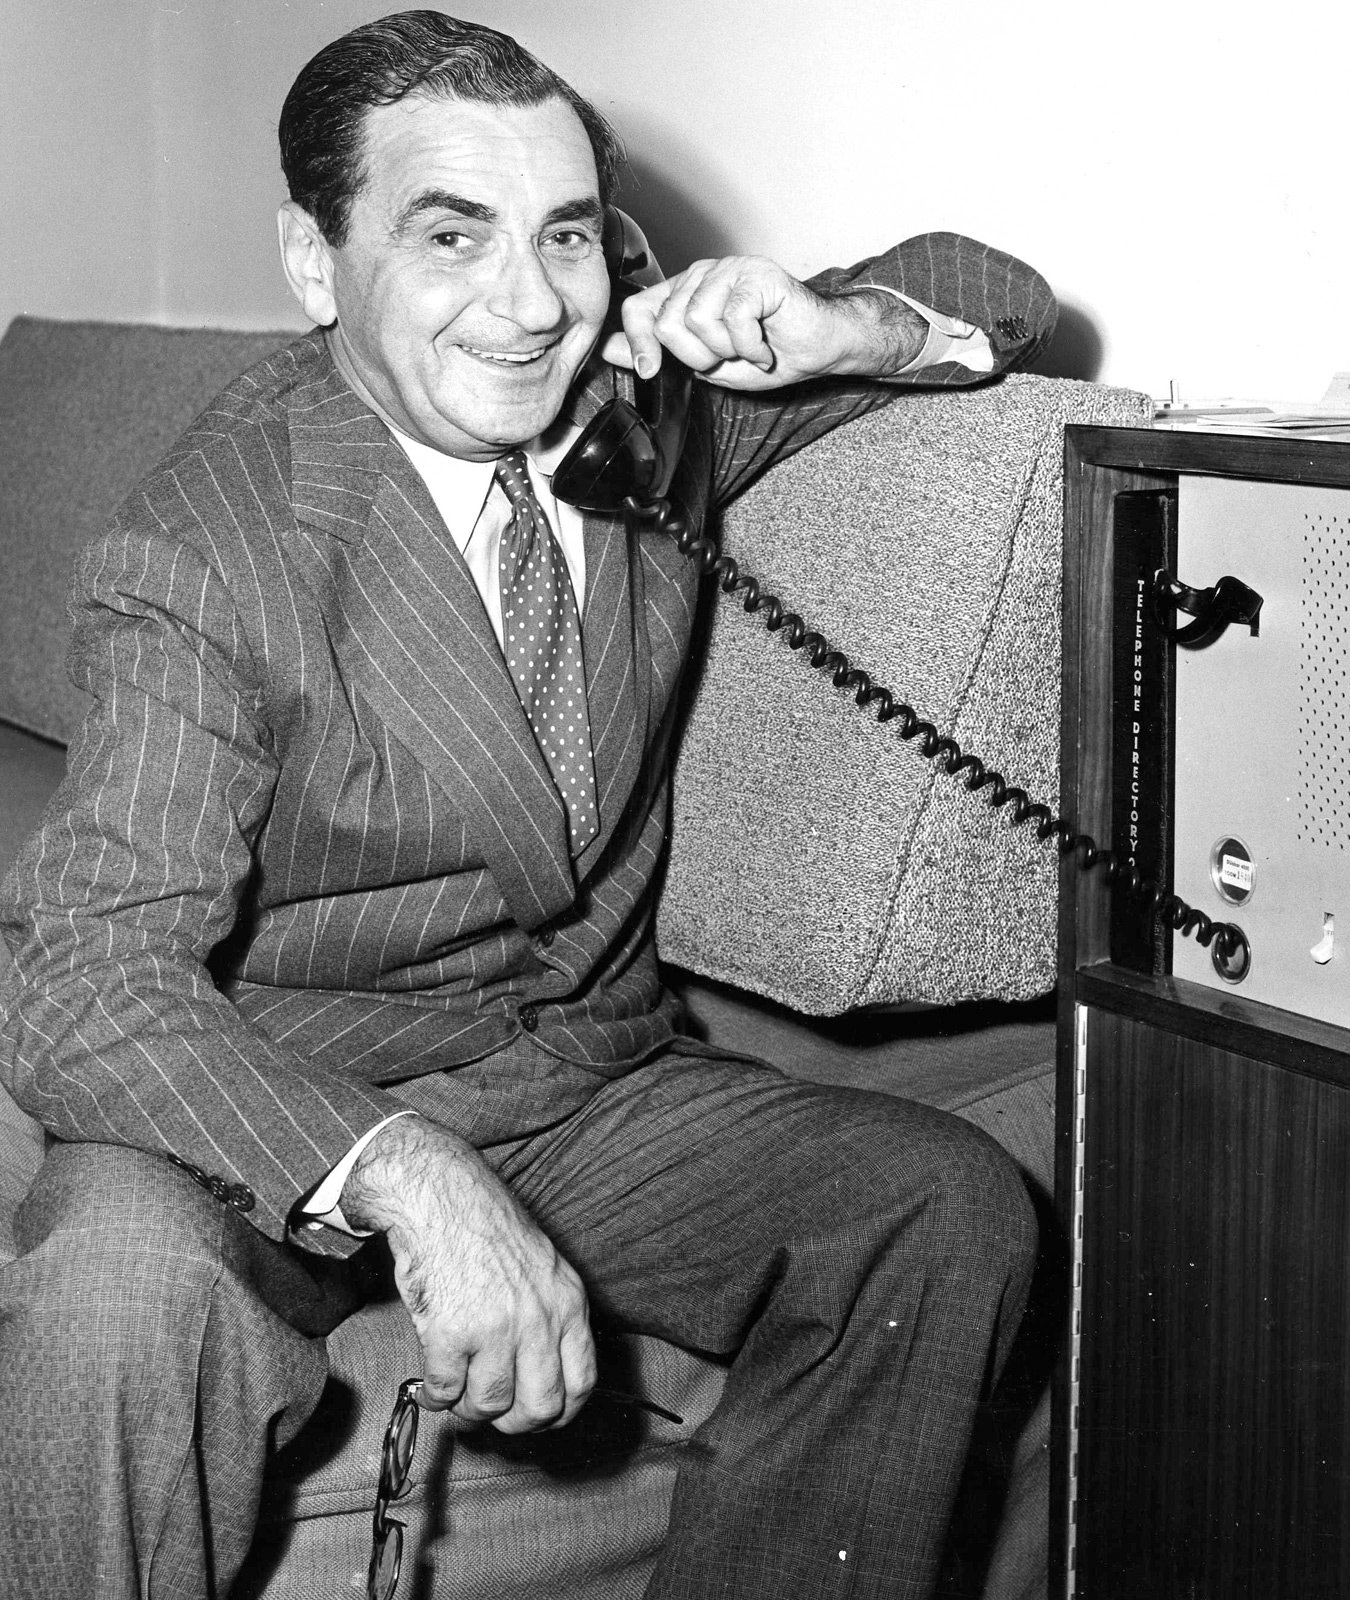 Irving Berlin on the promo tour for the White Christmas film, 1954